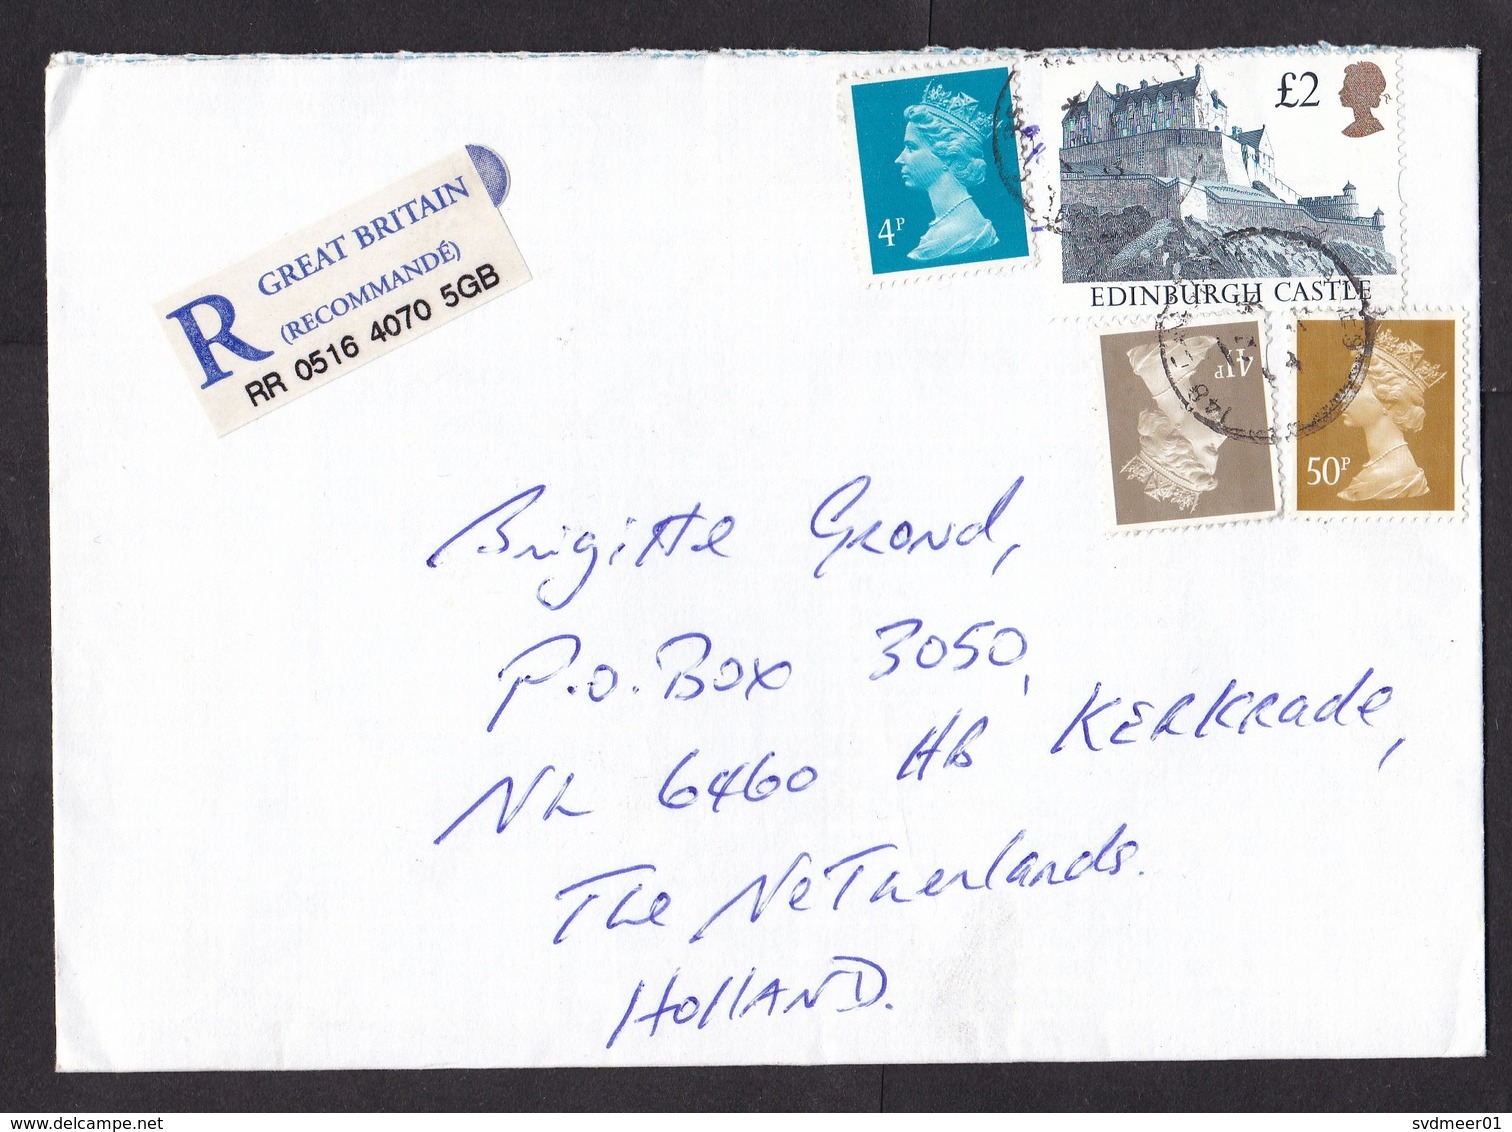 UK: Registered Cover To Netherlands, 1990s, 4 Stamps, Machin, Castle, 2.95 Rate, R-label At Back (traces Of Use) - Lettres & Documents